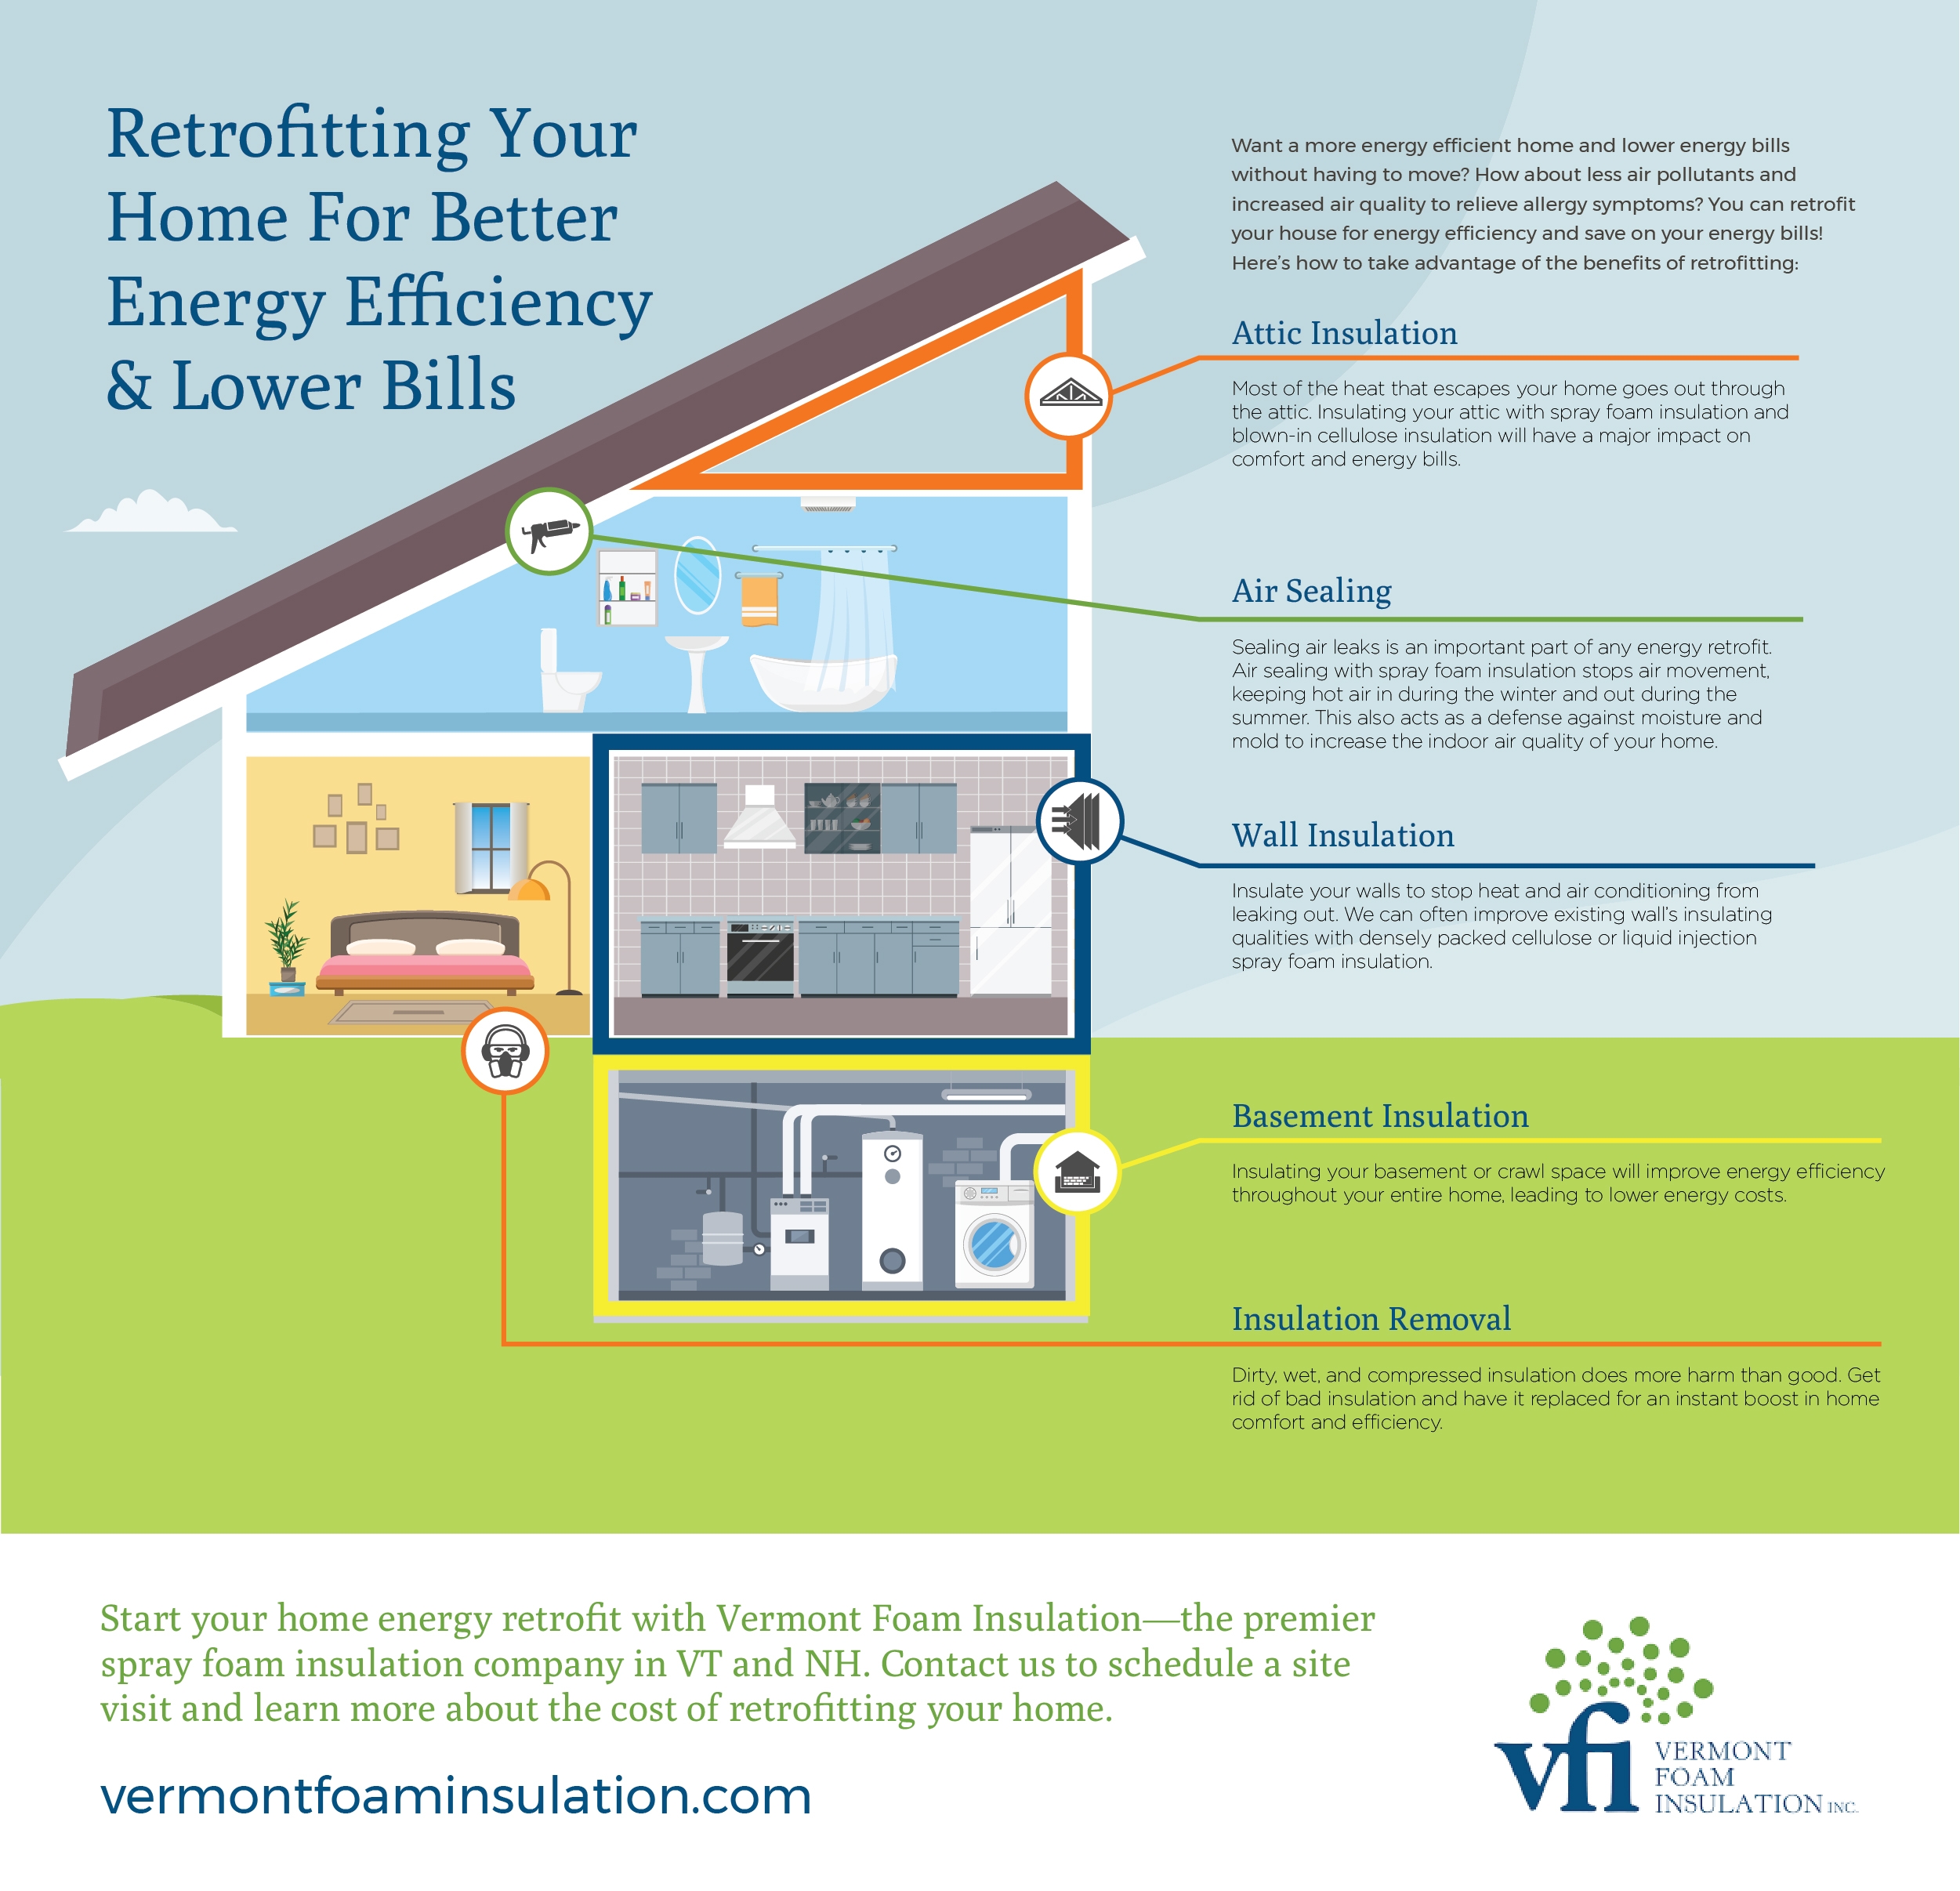 Retrofitting Your Home For Better Energy Efficiency & Lower Bills infographic header image 